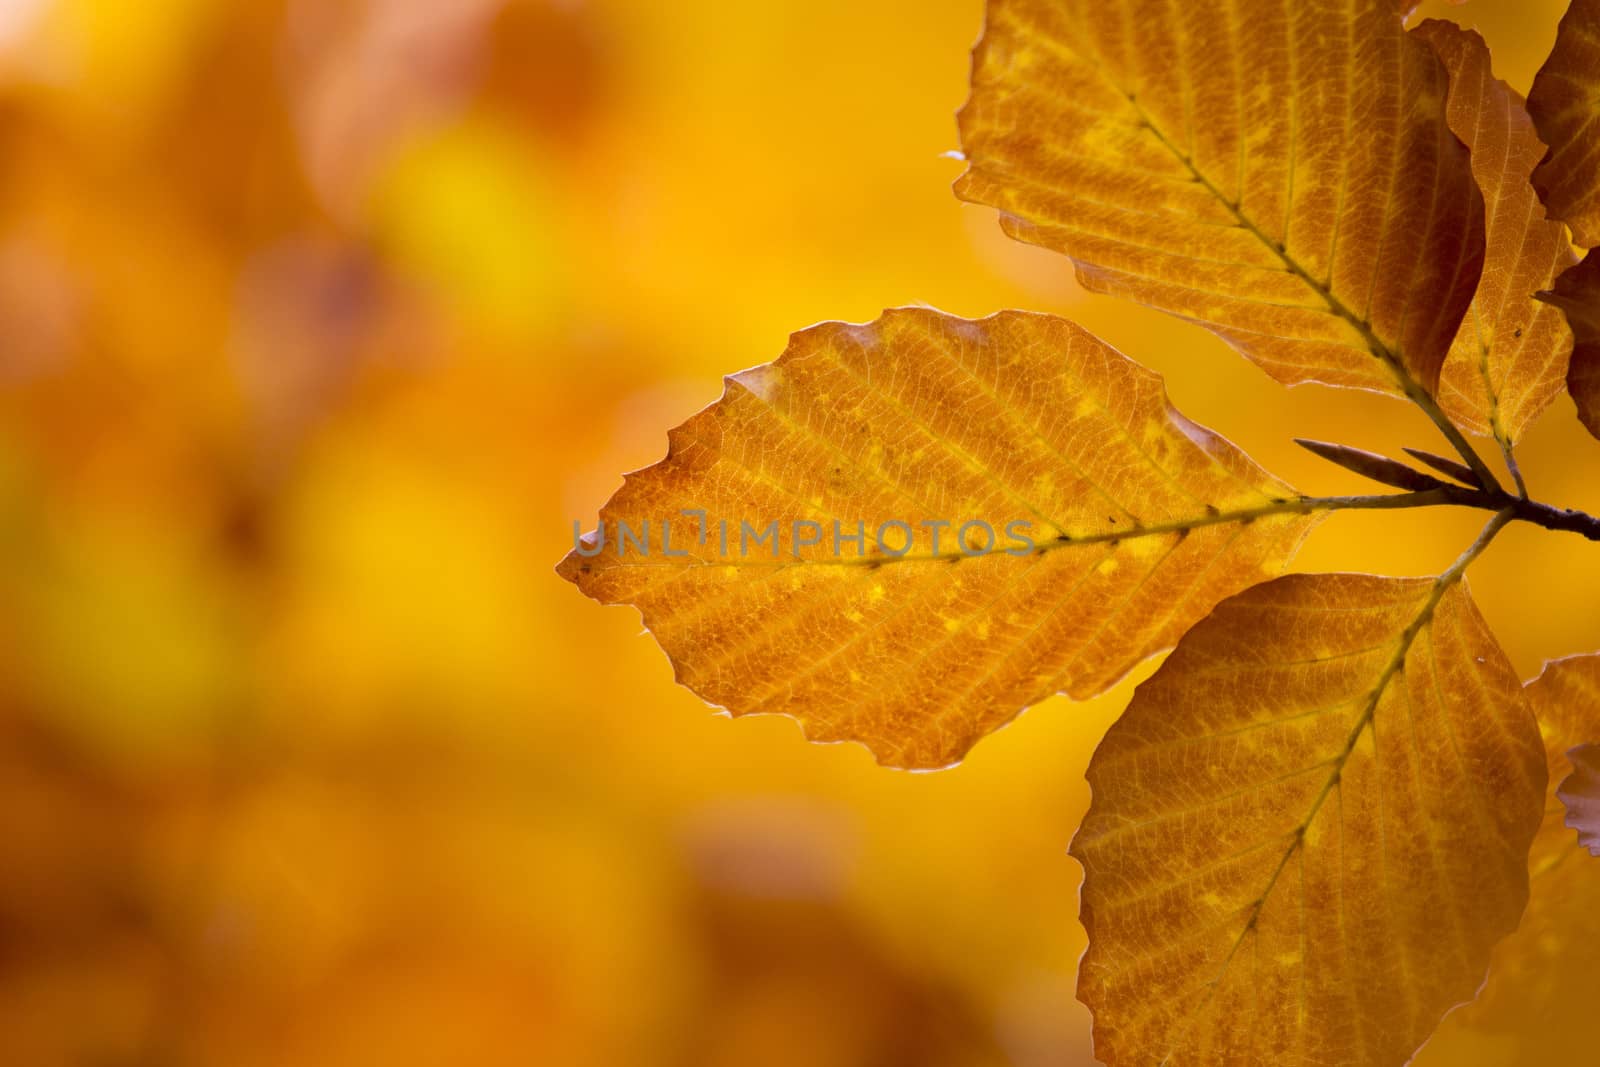 Autumn leaves with colorful background, orange, green, yellow, red